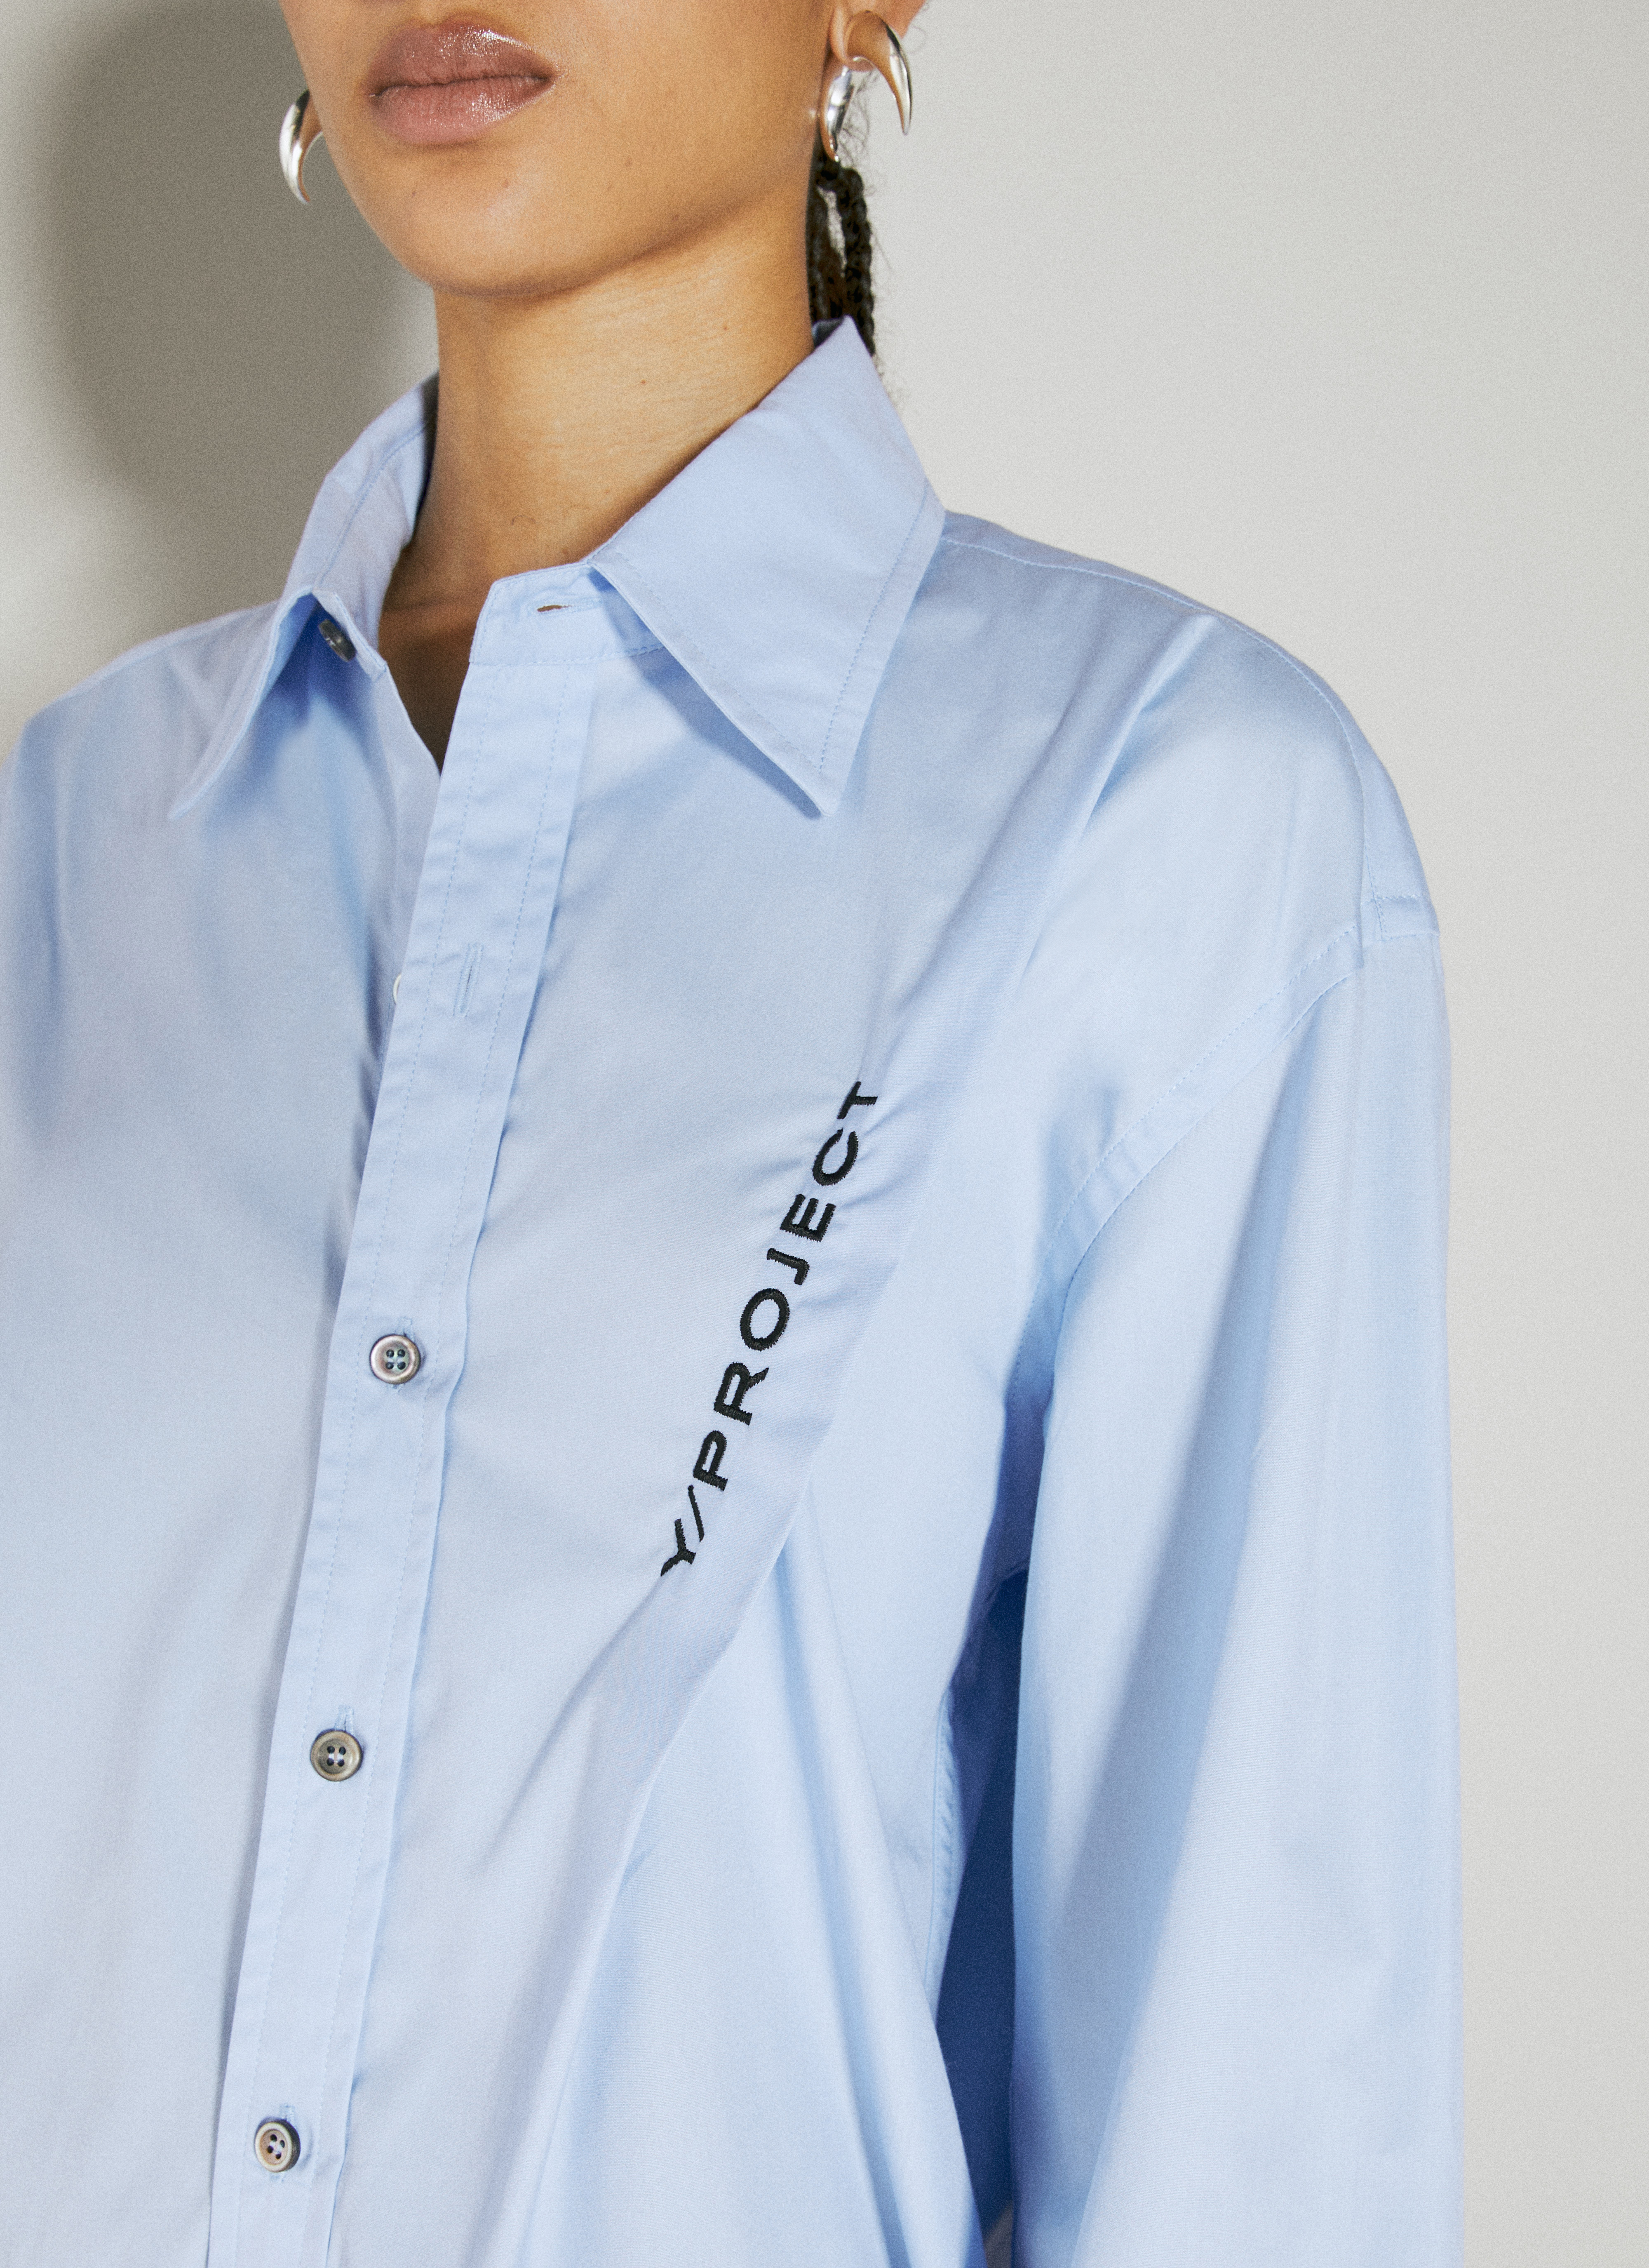 Y/Project Pinched Logo Shirt in Light Blue | LN-CC®